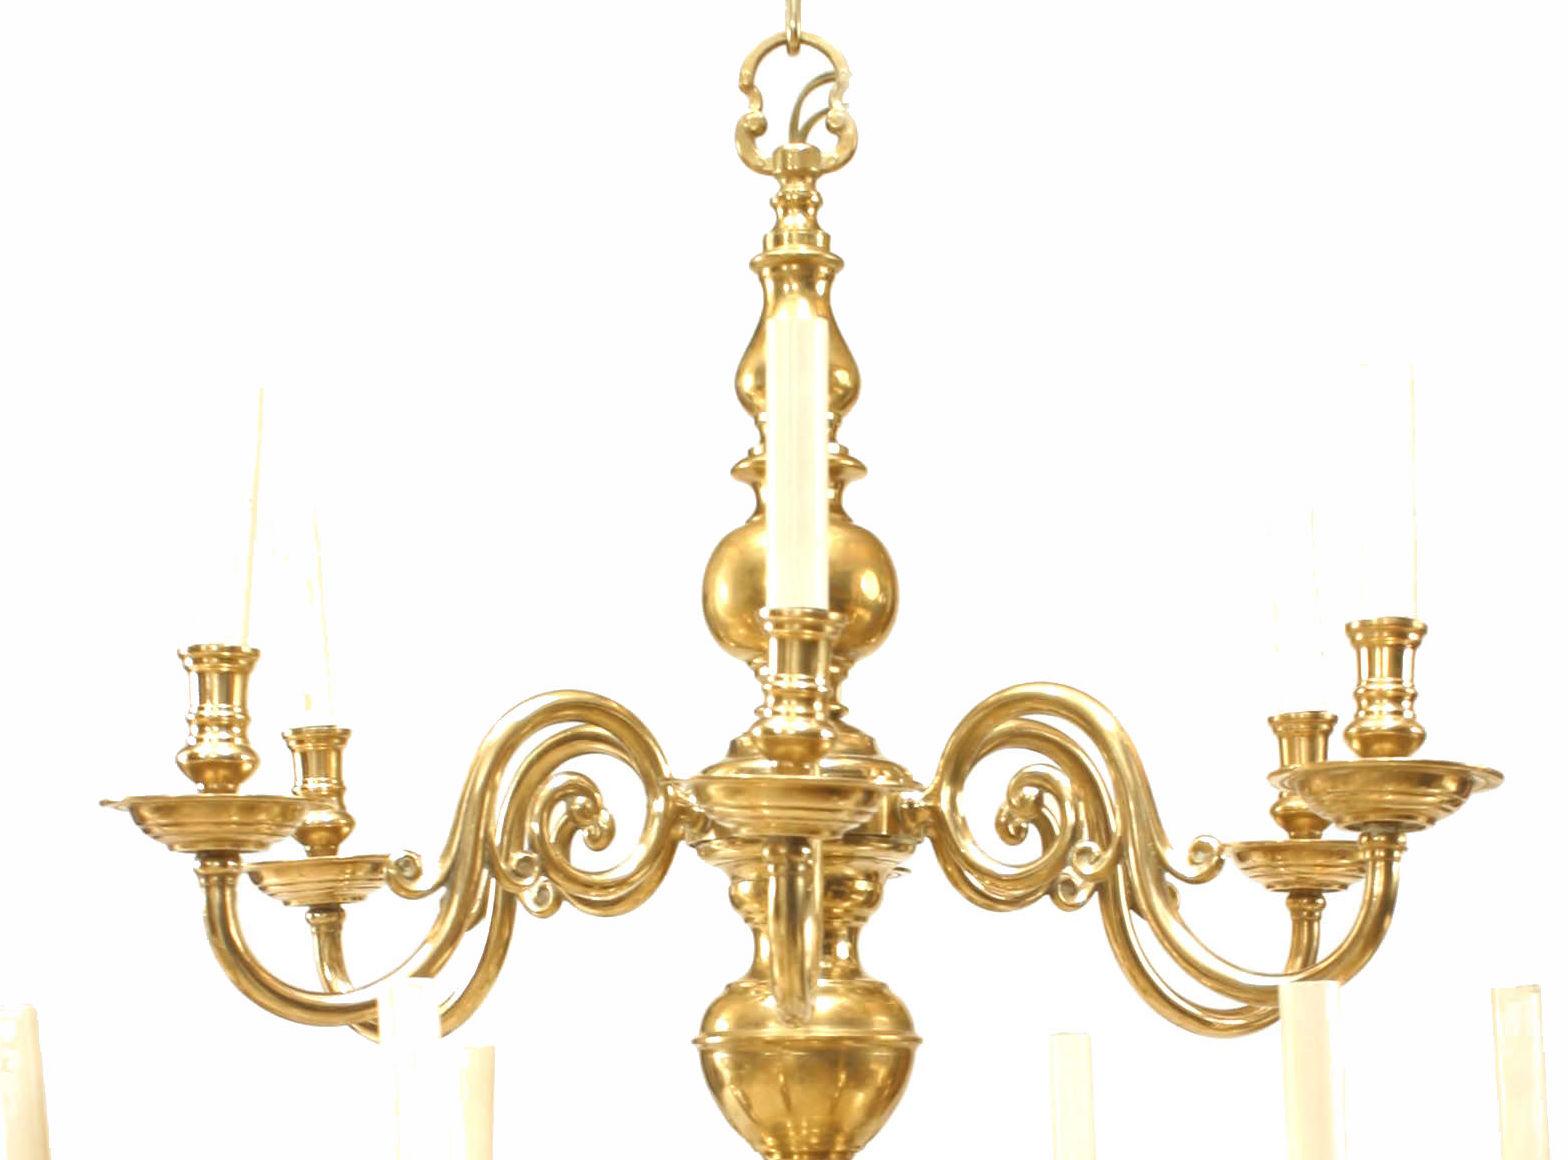 2 English Georgian-Style (20th Century) brass 2 tier 12 scroll arm chandeliers with ball design. (PRICED EACH)
